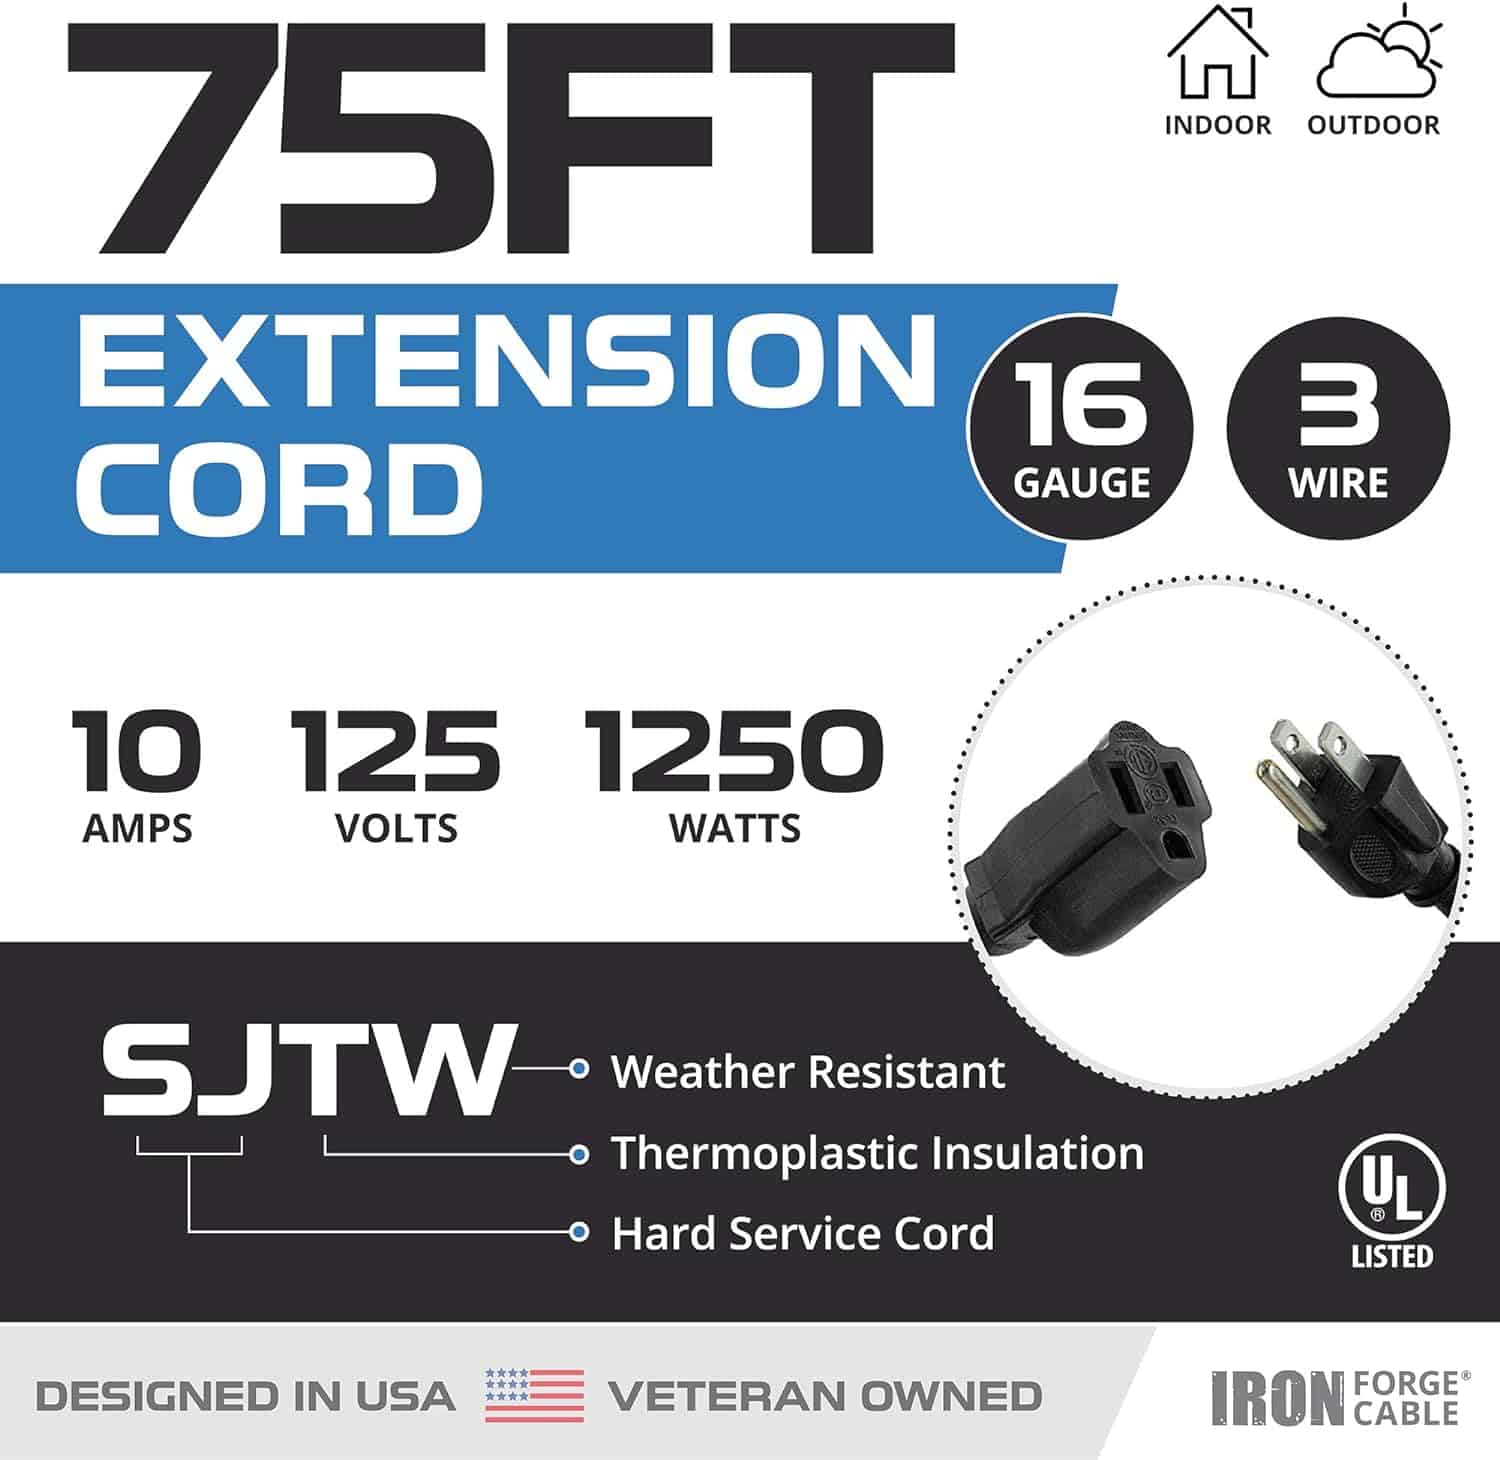 Iron Forge Cable 75 Ft Outdoor Extension Cord 16 3 Black 75 Foot Extension Cord Indoor Outdoor Use 3 Prong Weatherproof Exterior Extension Cord Gr 2